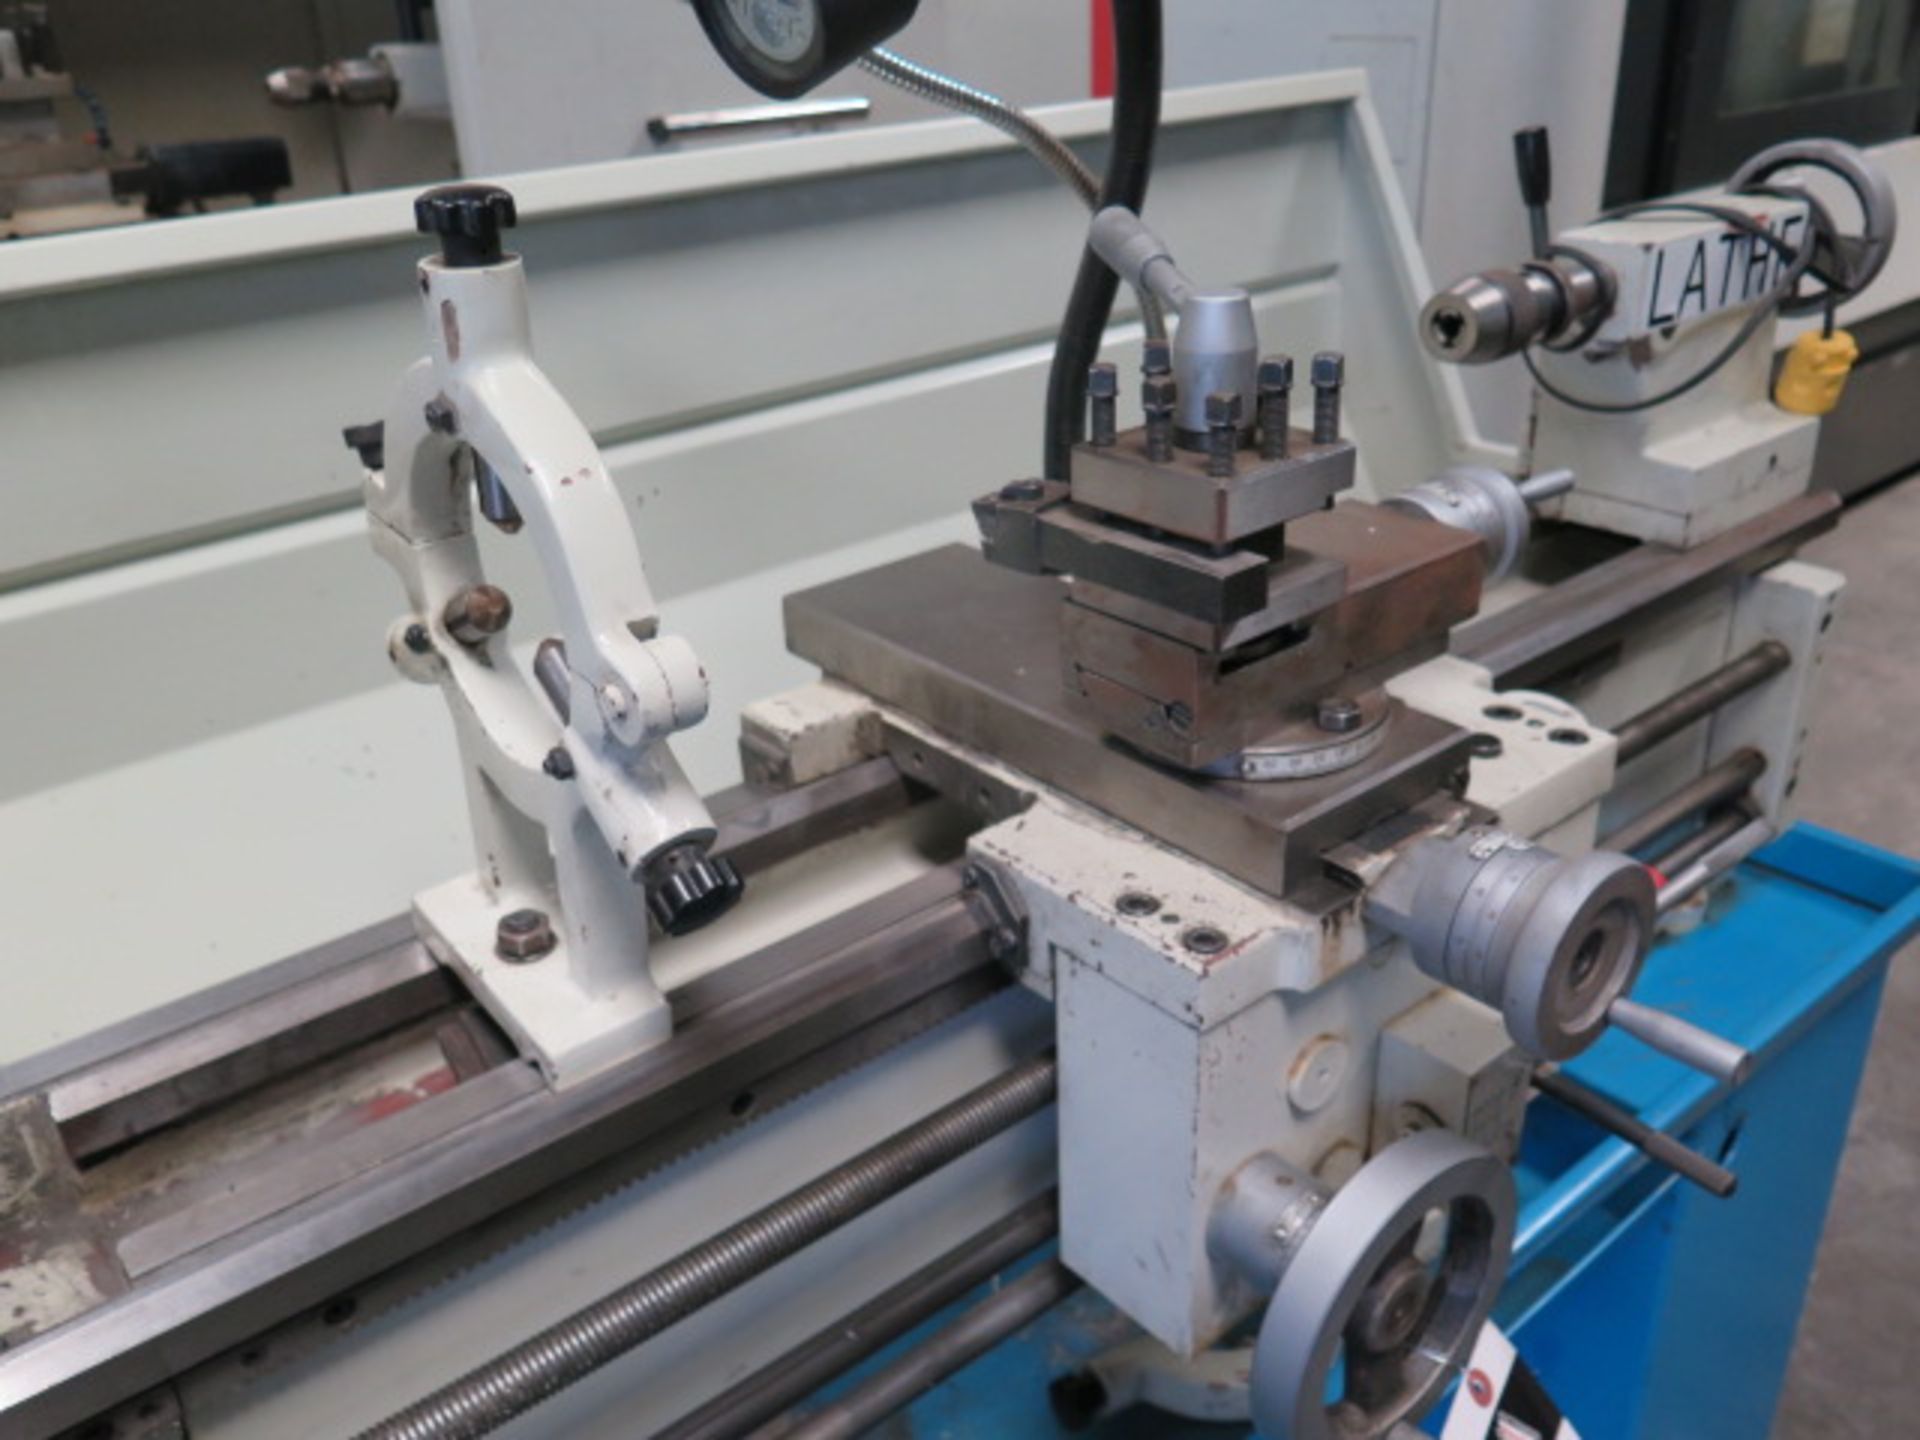 Acra Turn FI-1340 GSM 13" x 40" Geared Gap Bed Lathe w/ 70-2000 RPM, Inch/mm Threading, SOLD AS IS - Image 6 of 8